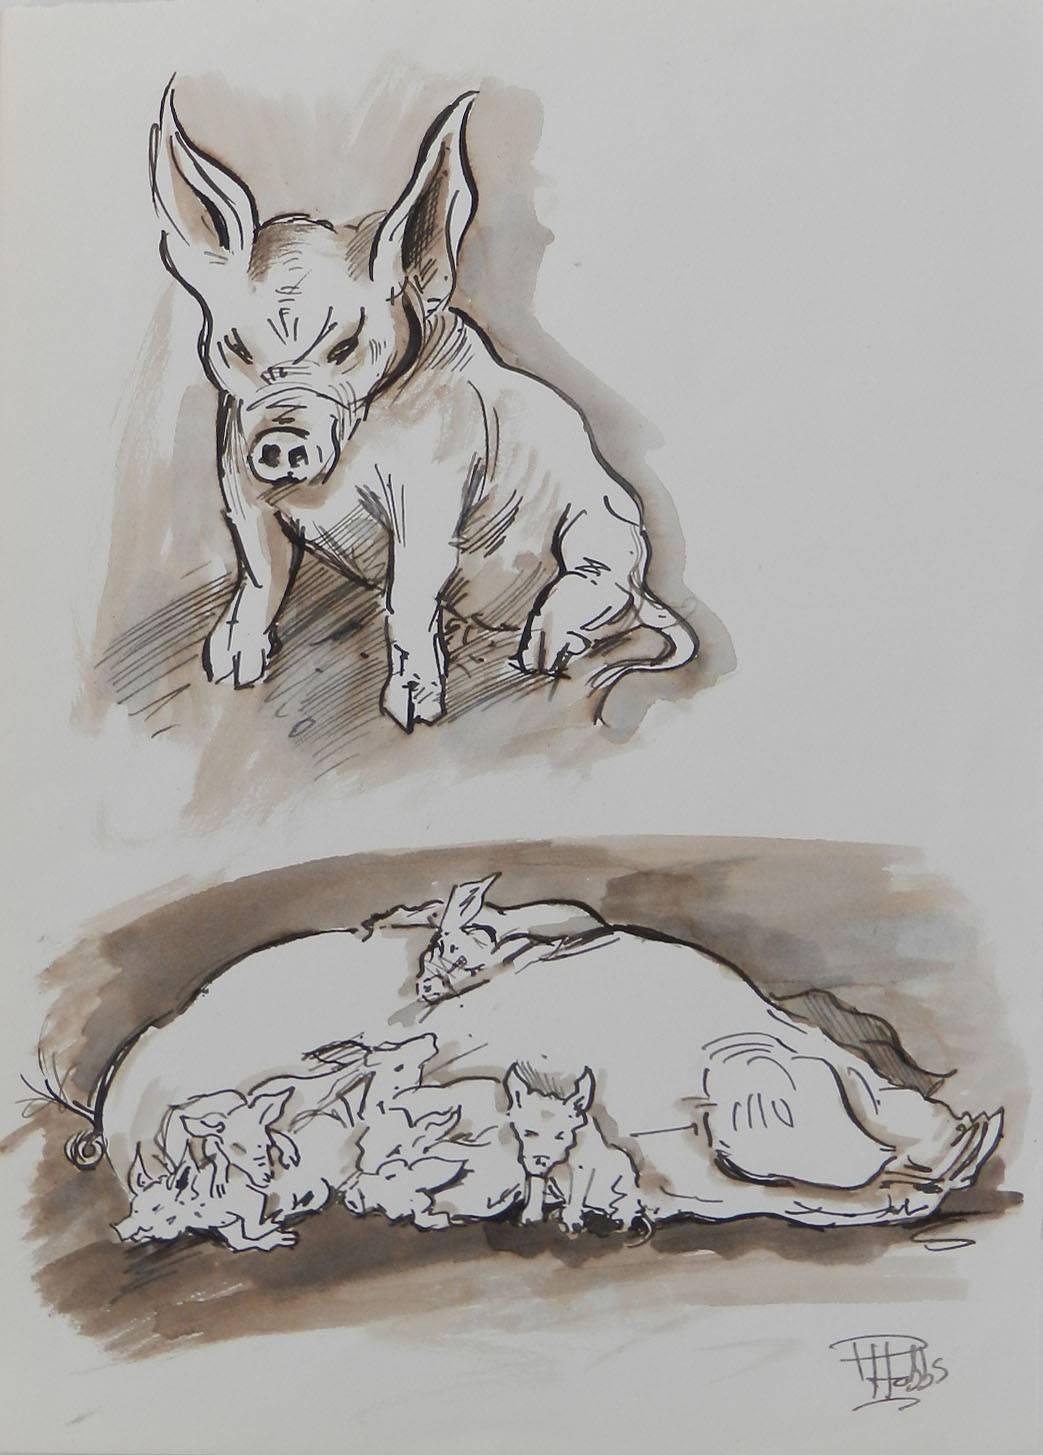 Study of Pigs painting in Sepia tones original watercolor circa 1950-1960
By UK artist Peter Hobbs 1930-1994
Signed by the artist 
Sow with piglets with a detailed study of a slightly cross looking piglet....!!
This British artist was a professional